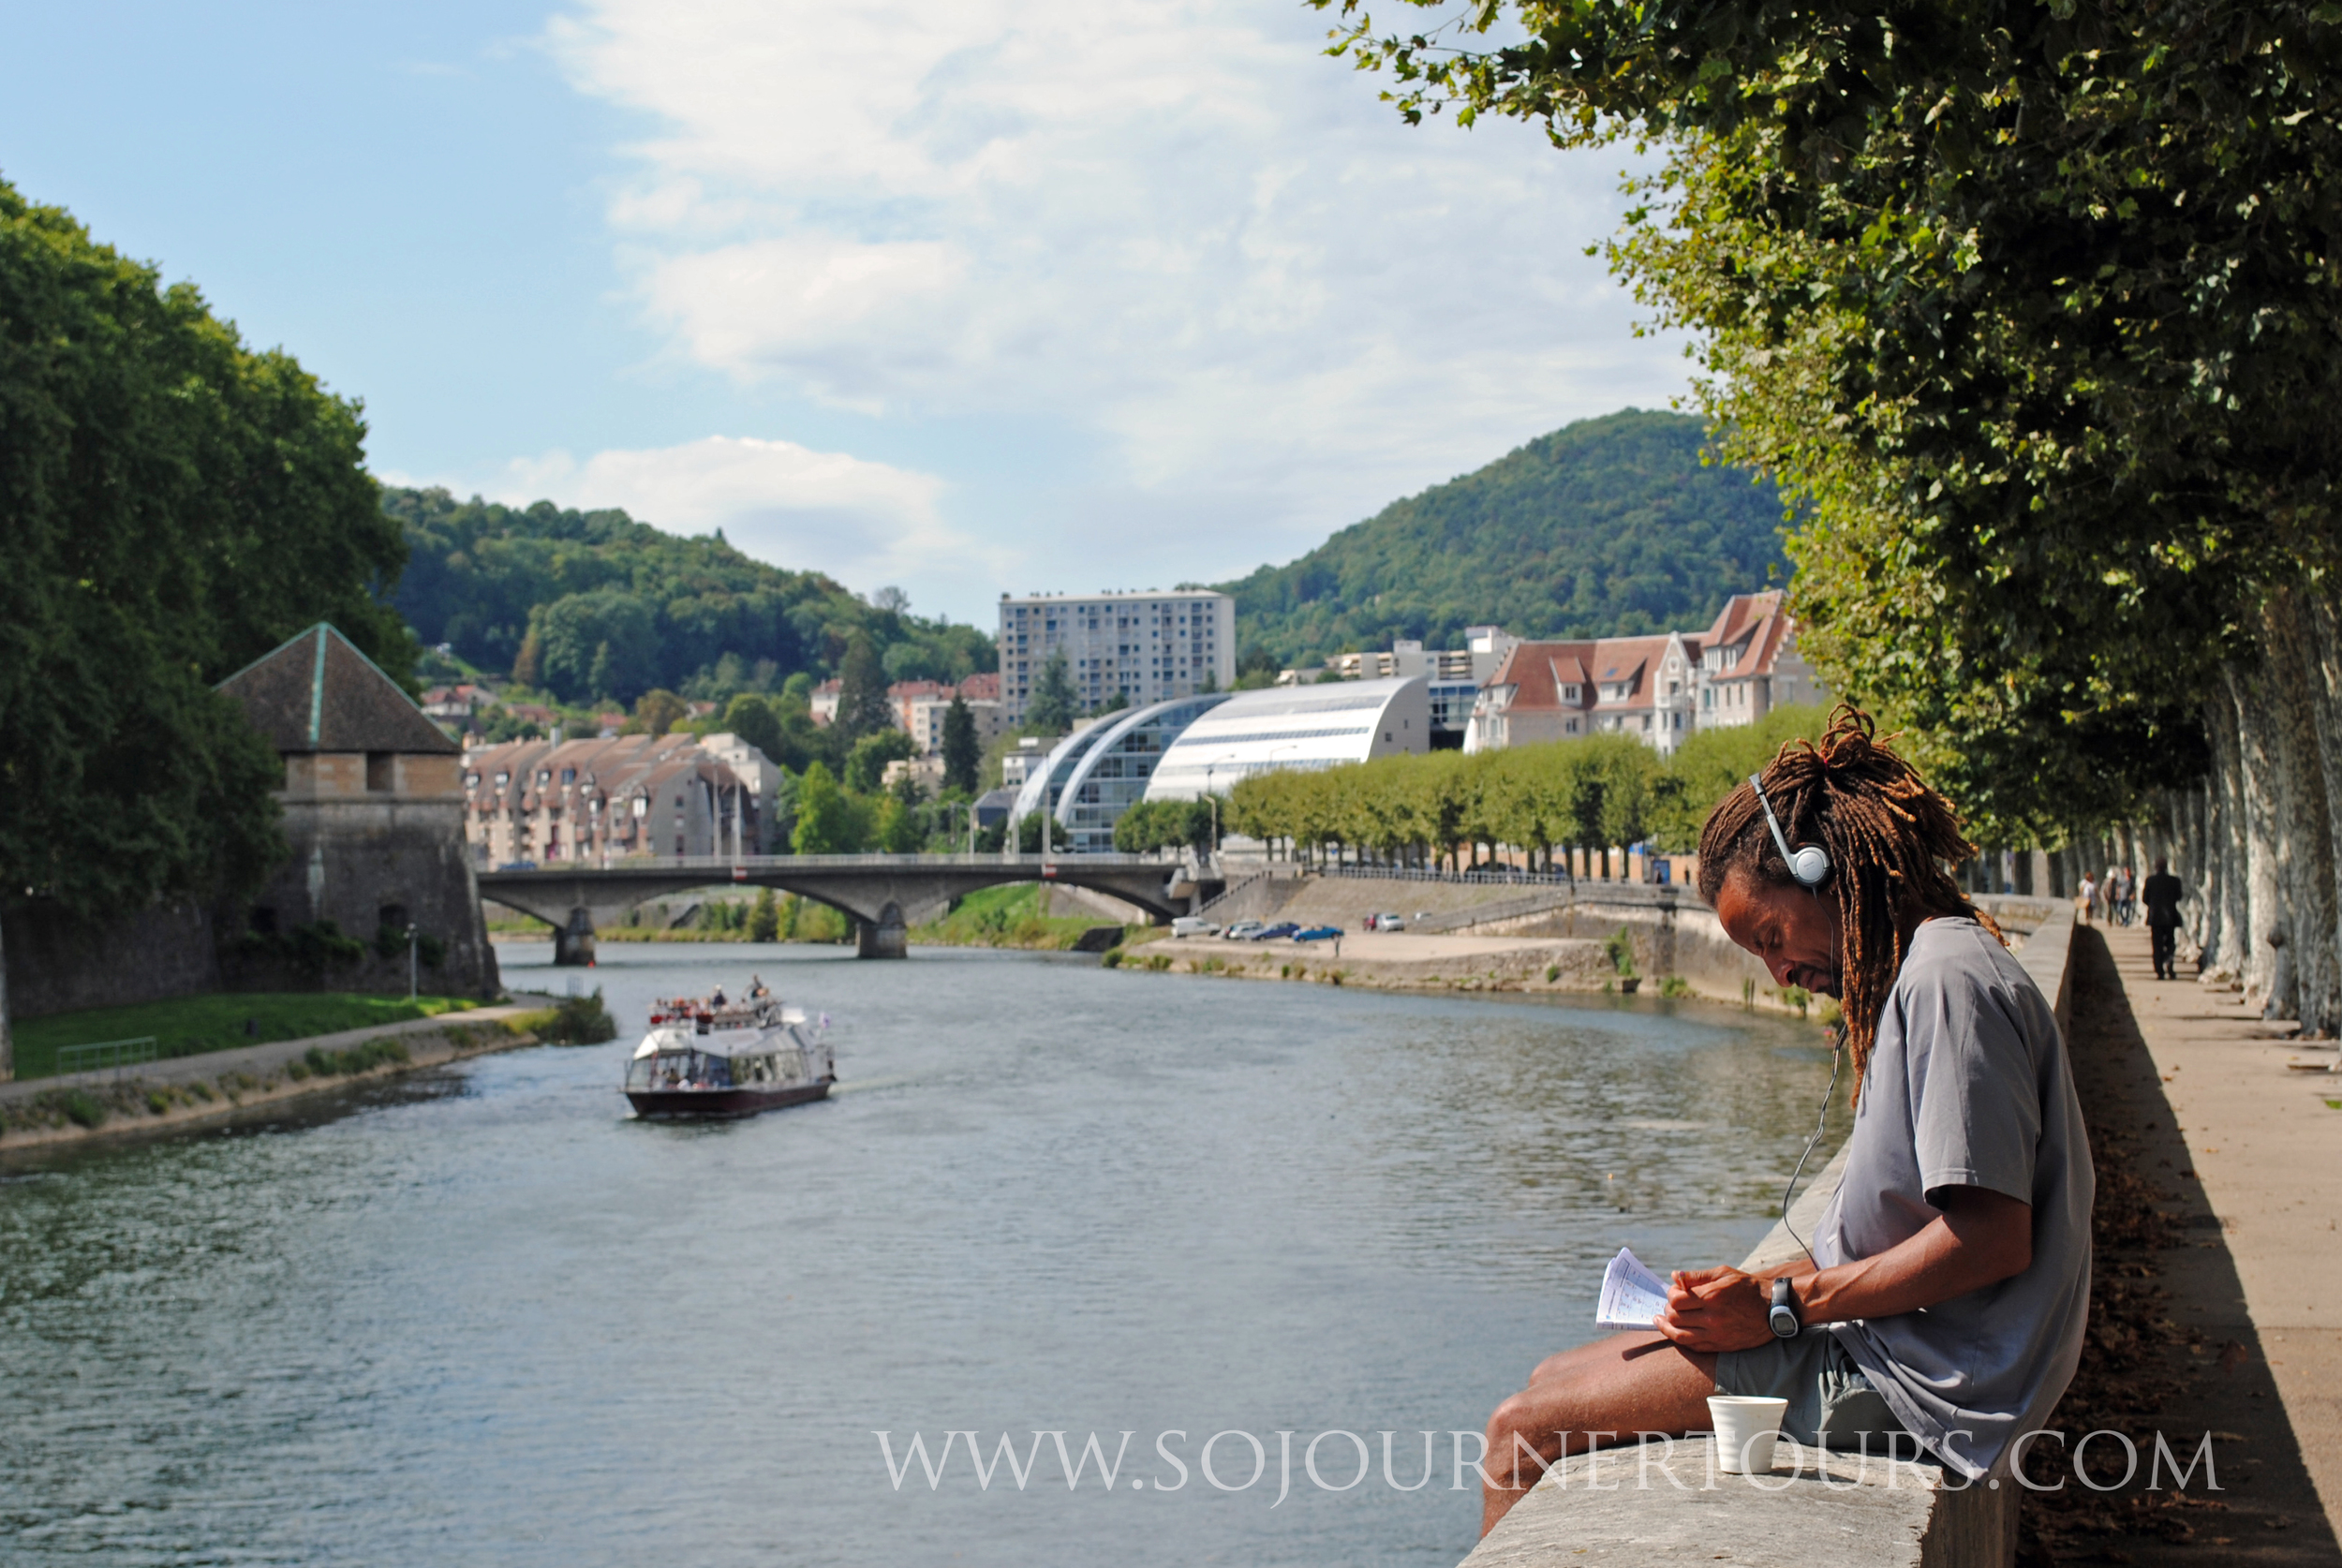 French Language & Culture Immersion: Sojourner Tours